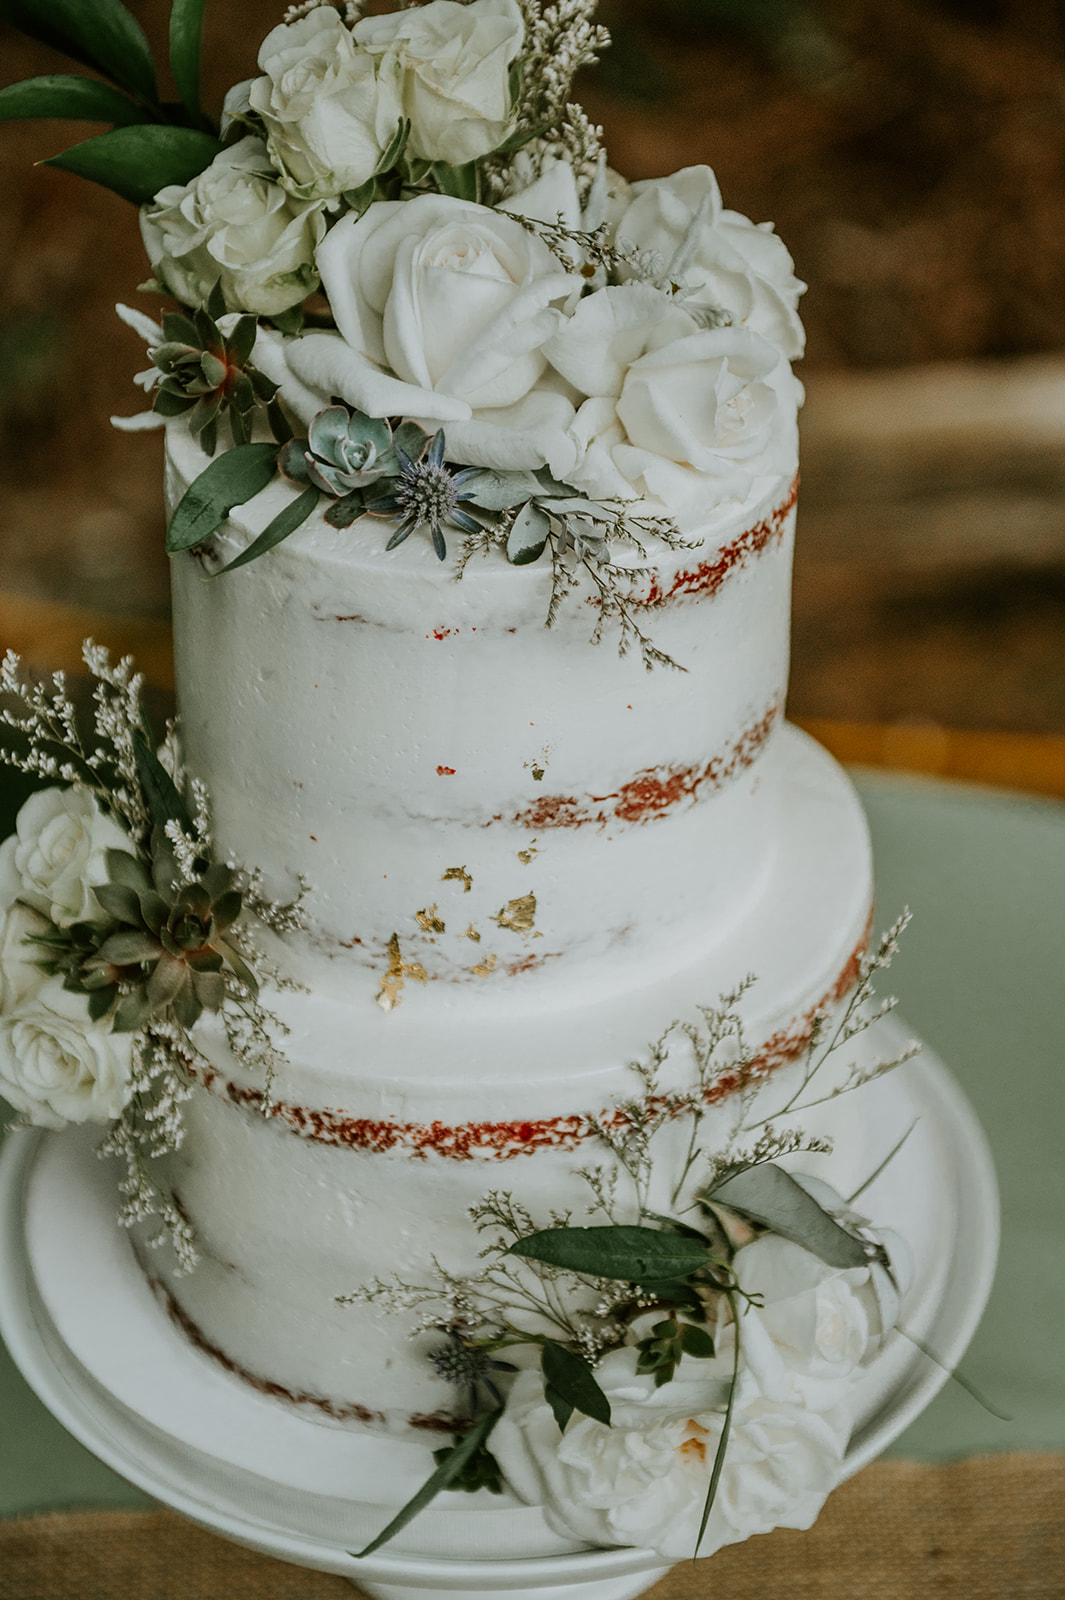 White, green, and gold wedding cake with white roses